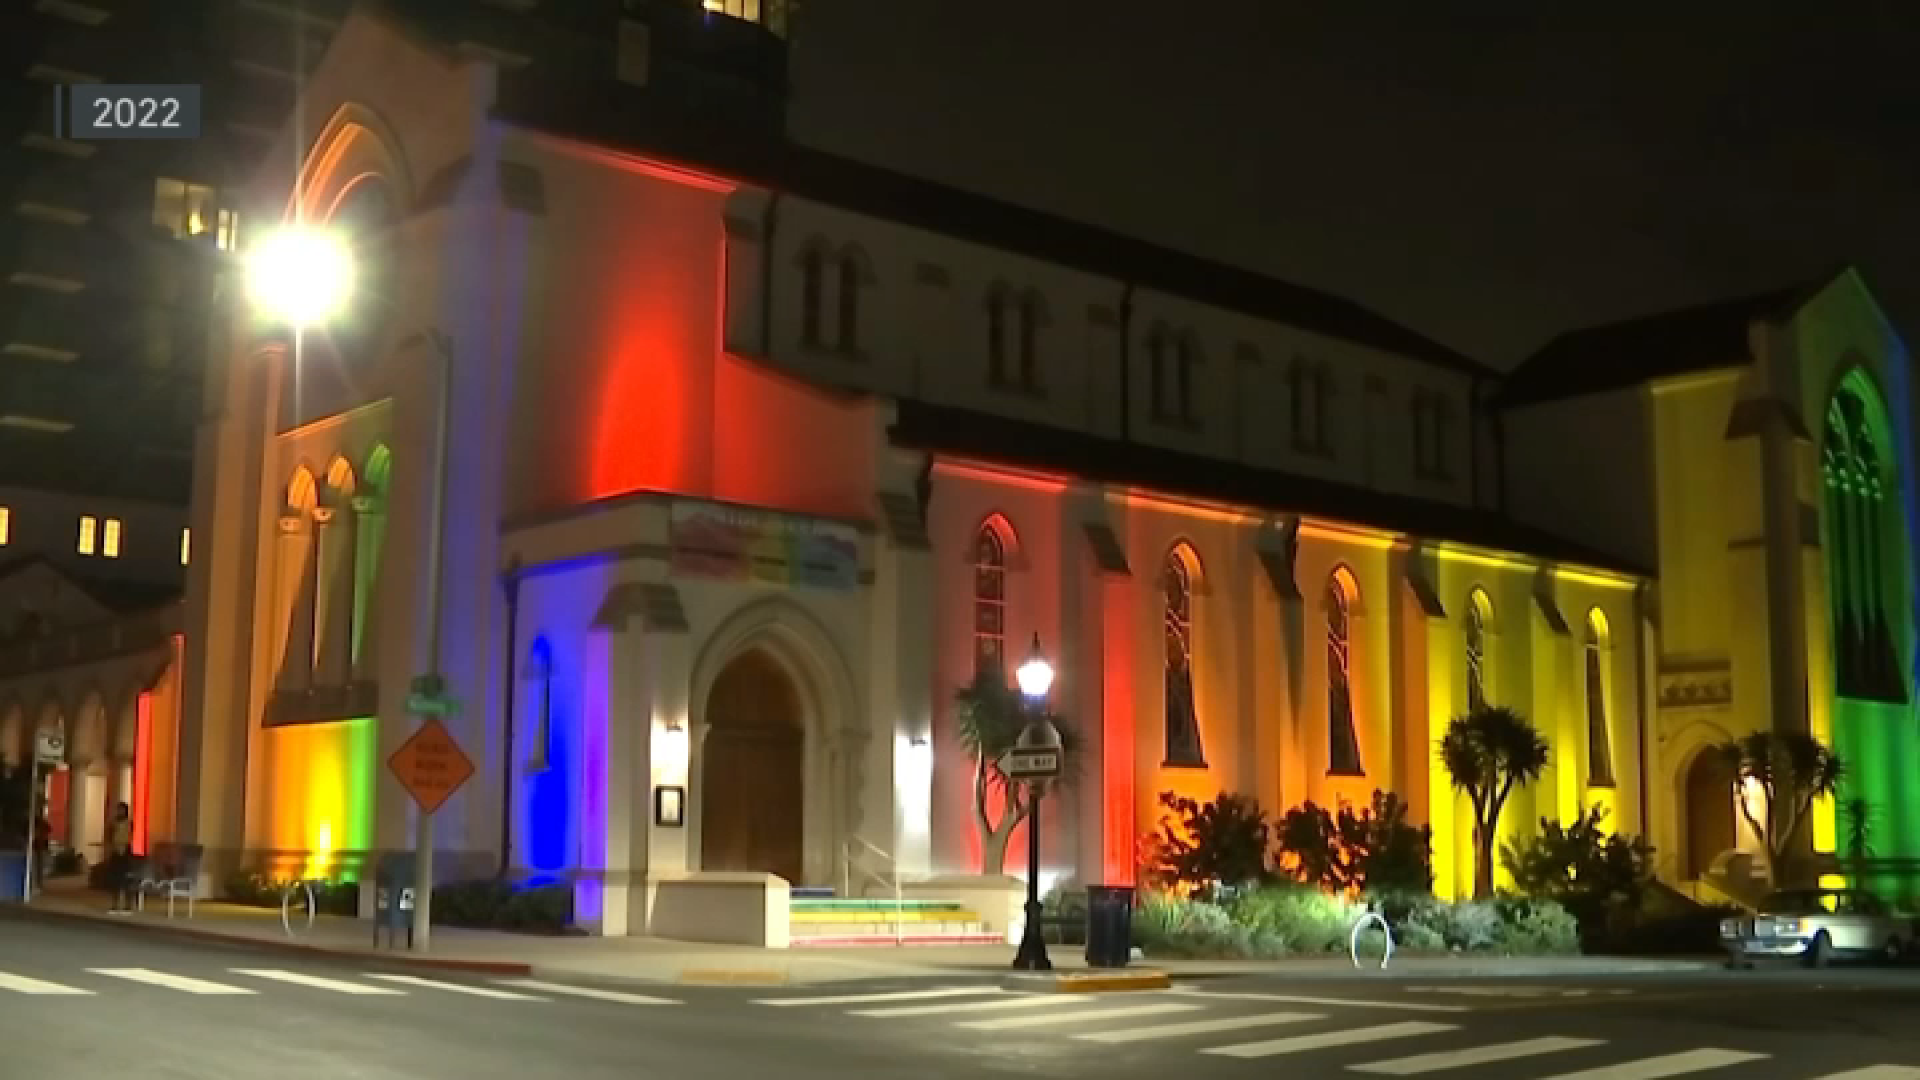 Pride Month: Cathedral Church of St. John the Divine celebrates with  eye-catching lights display - ABC7 New York